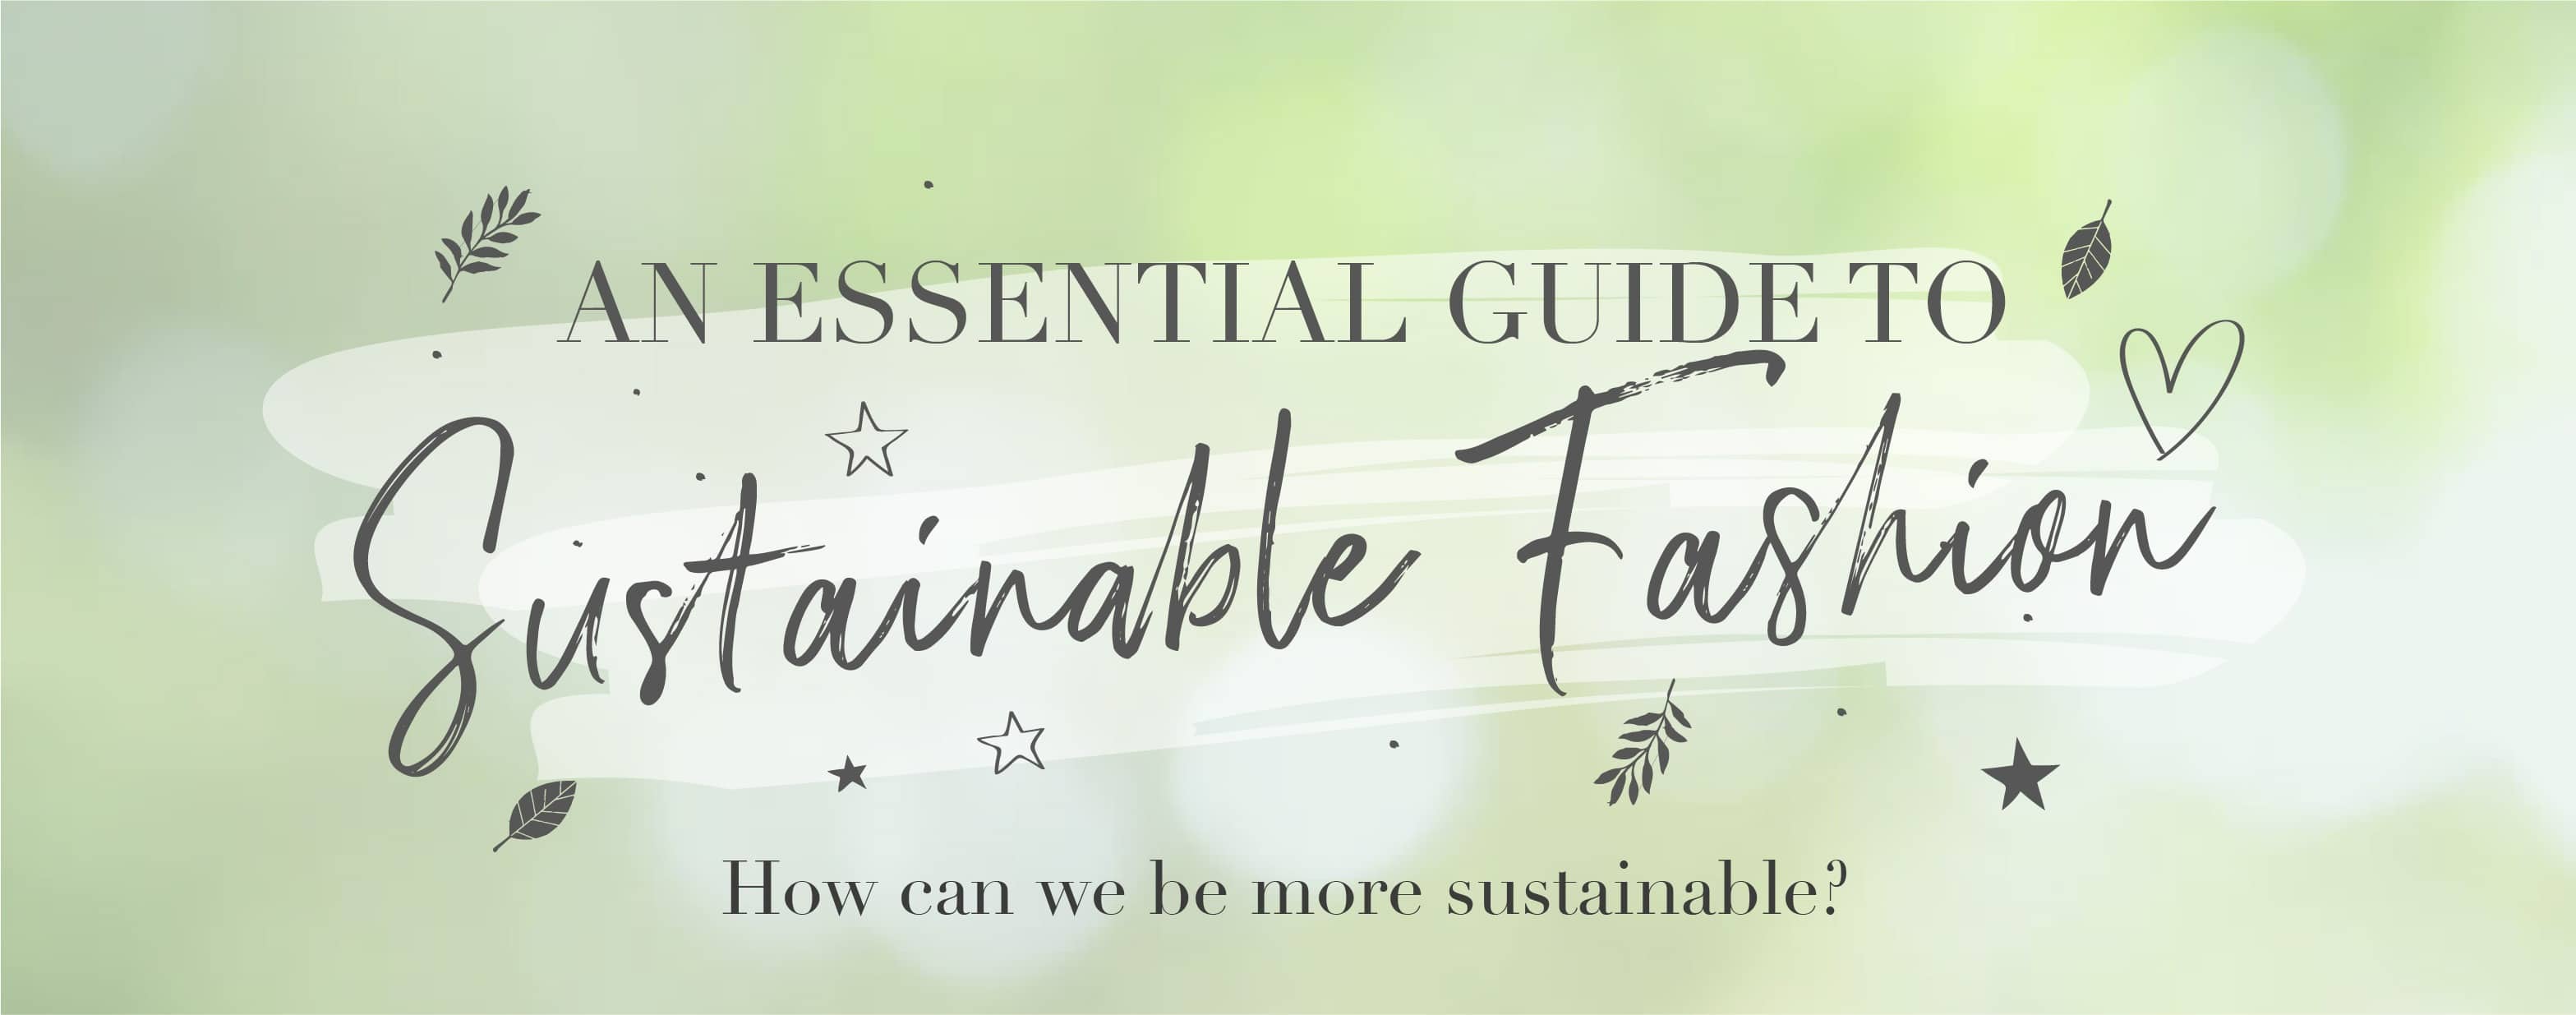 Guide To Sustainable Fashion